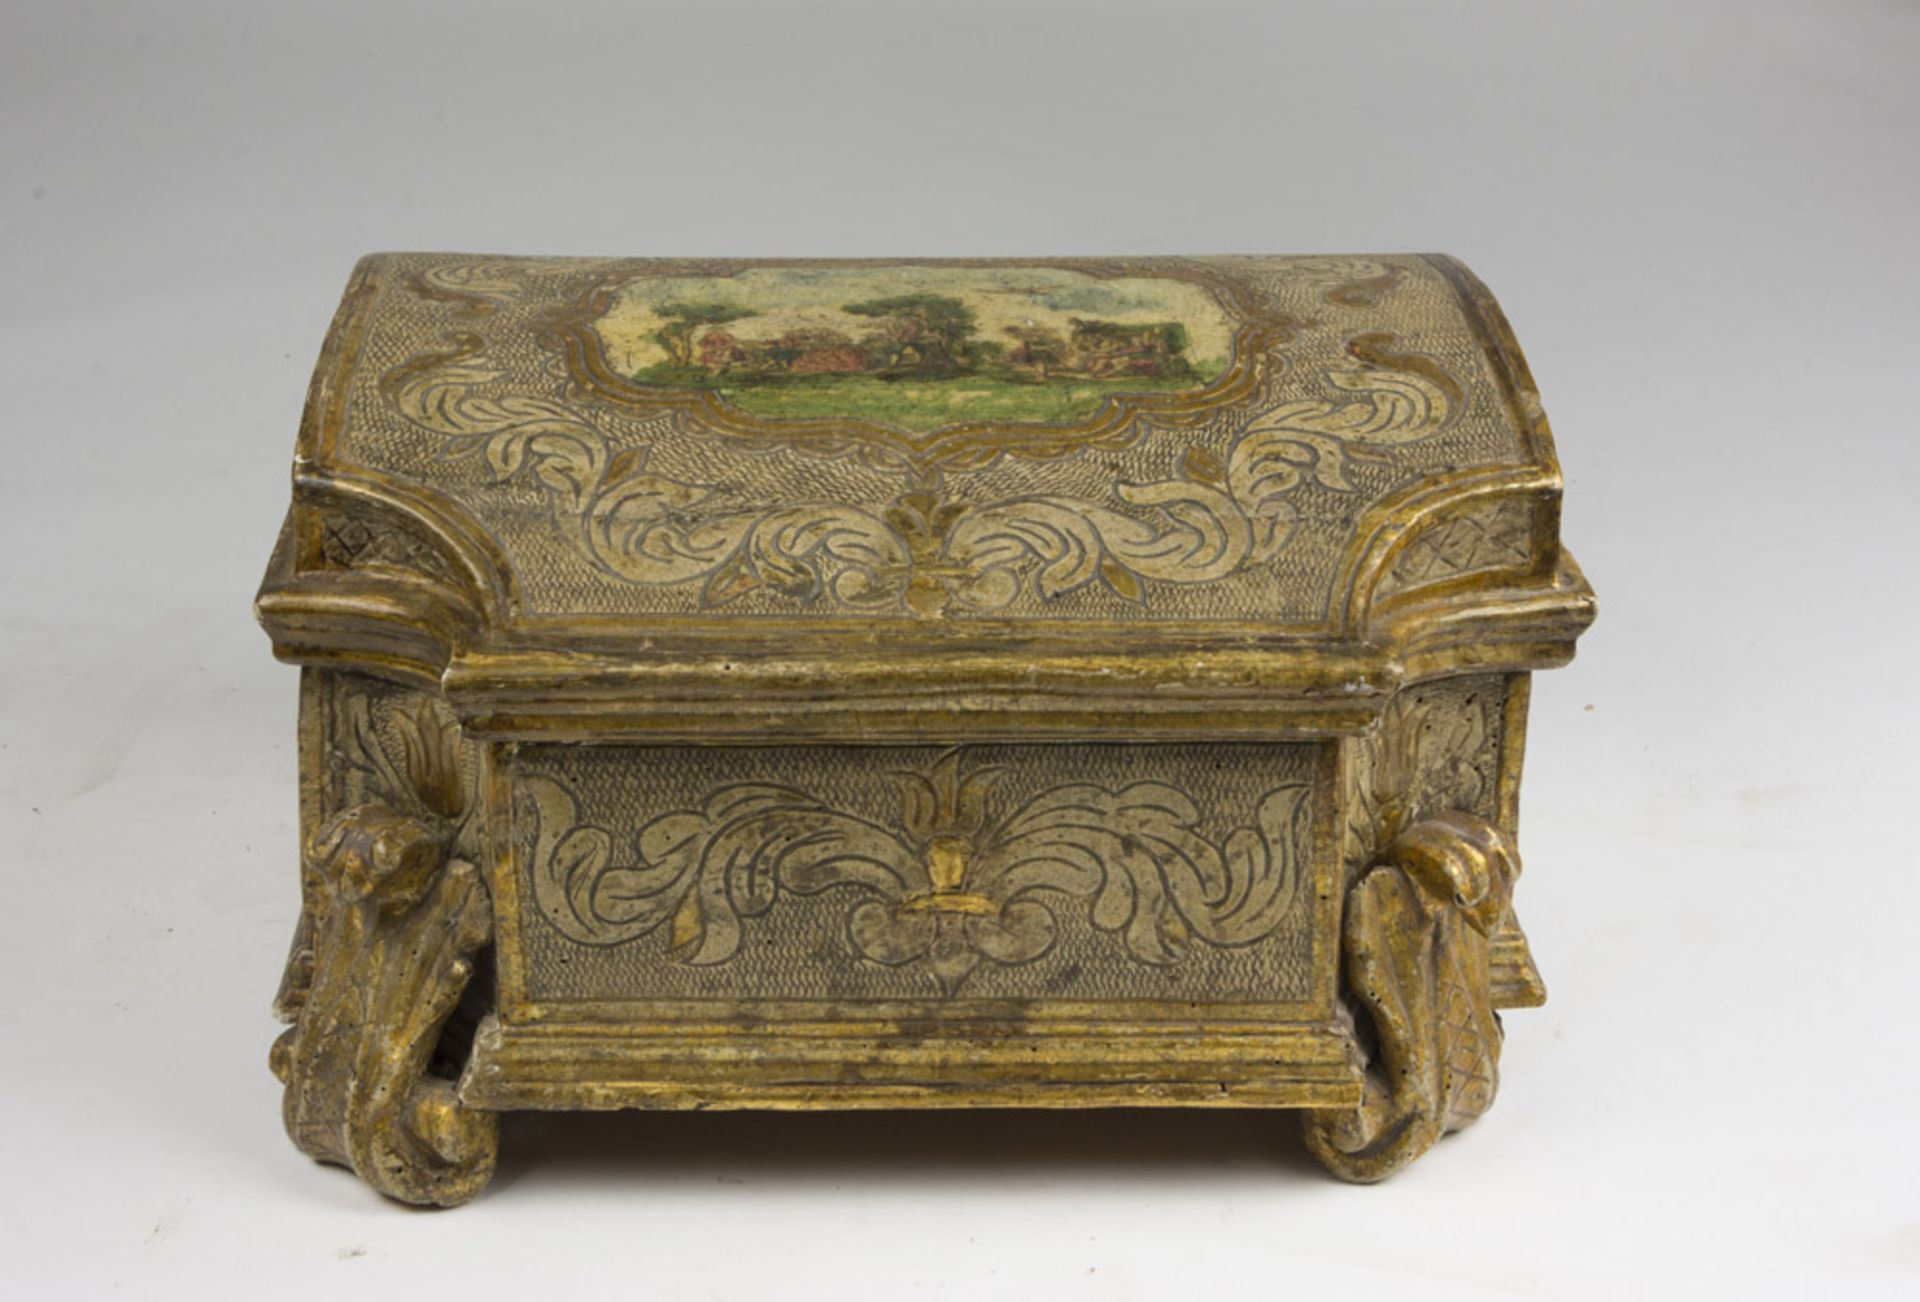 CASKET OF POOR ART, PROBABLY VENICE 18TH CENTURY in gilt wood, cover painted with aristocratic